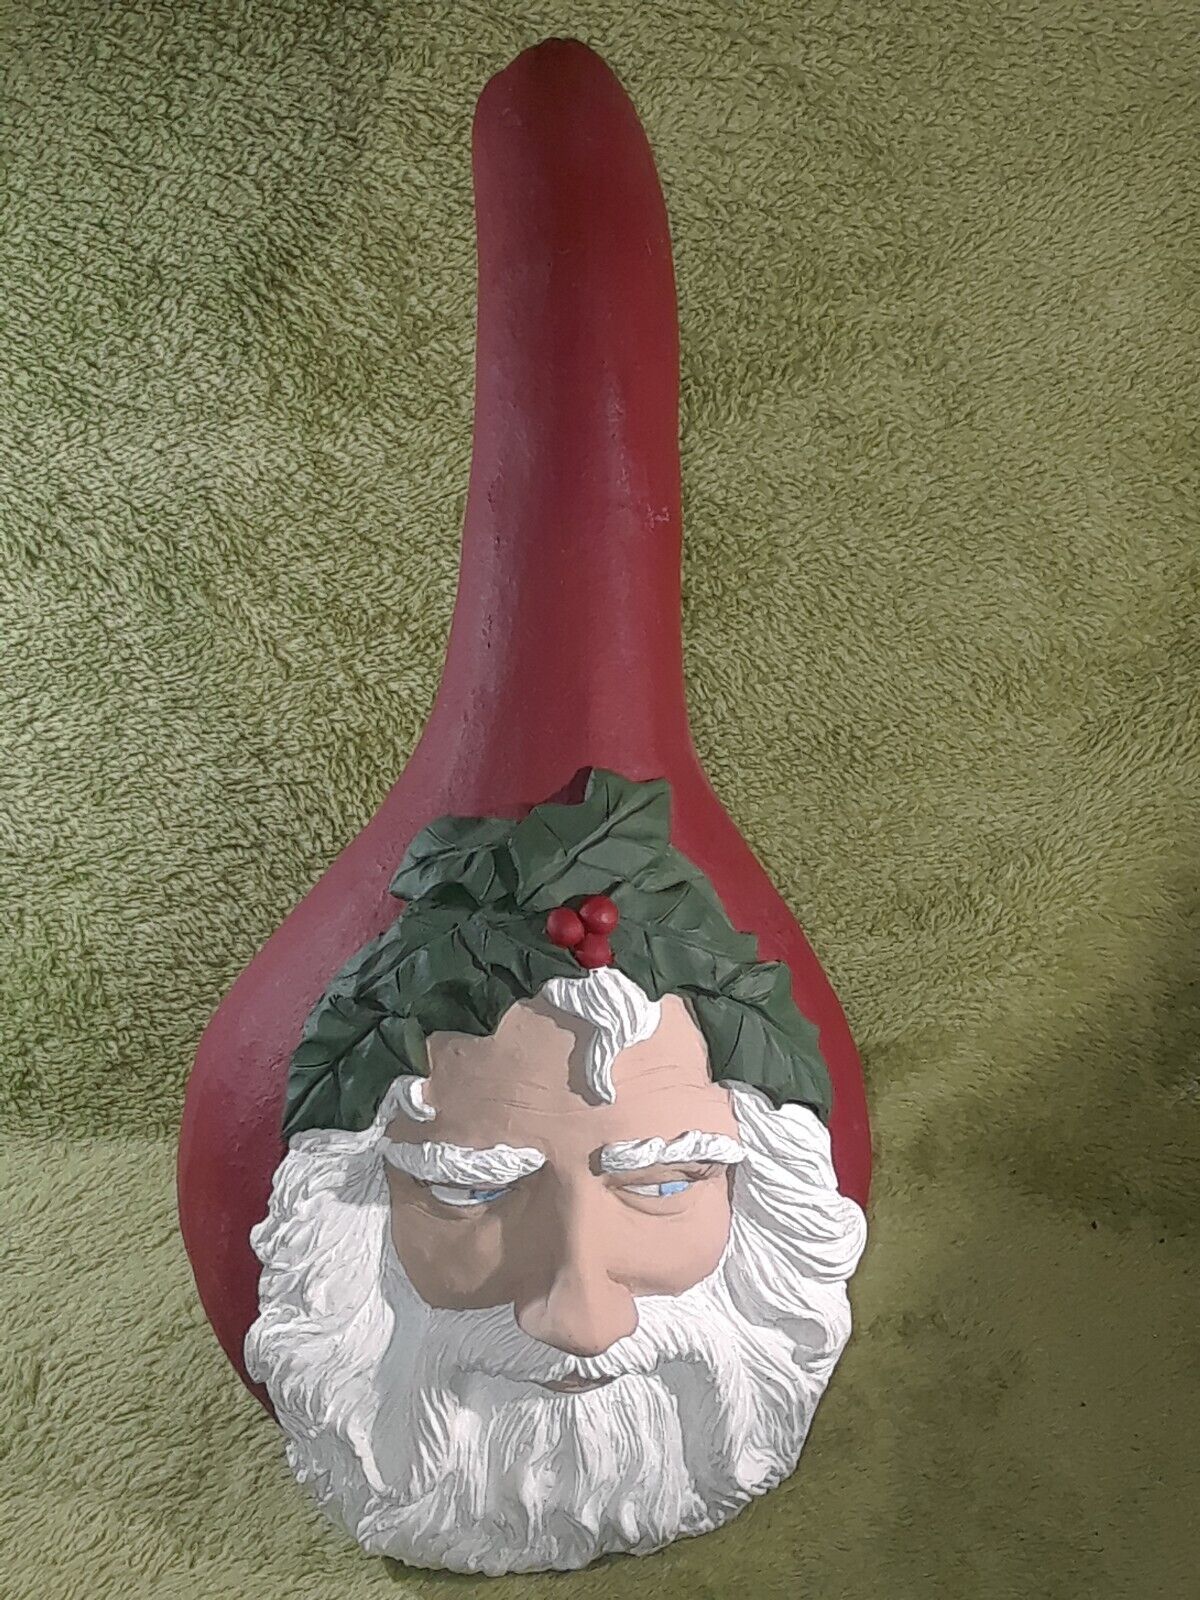 VINTAGE EARLY 1990s SANTA GOURD MADE FROM PECAN SHELL RESIN HAND PAINTED